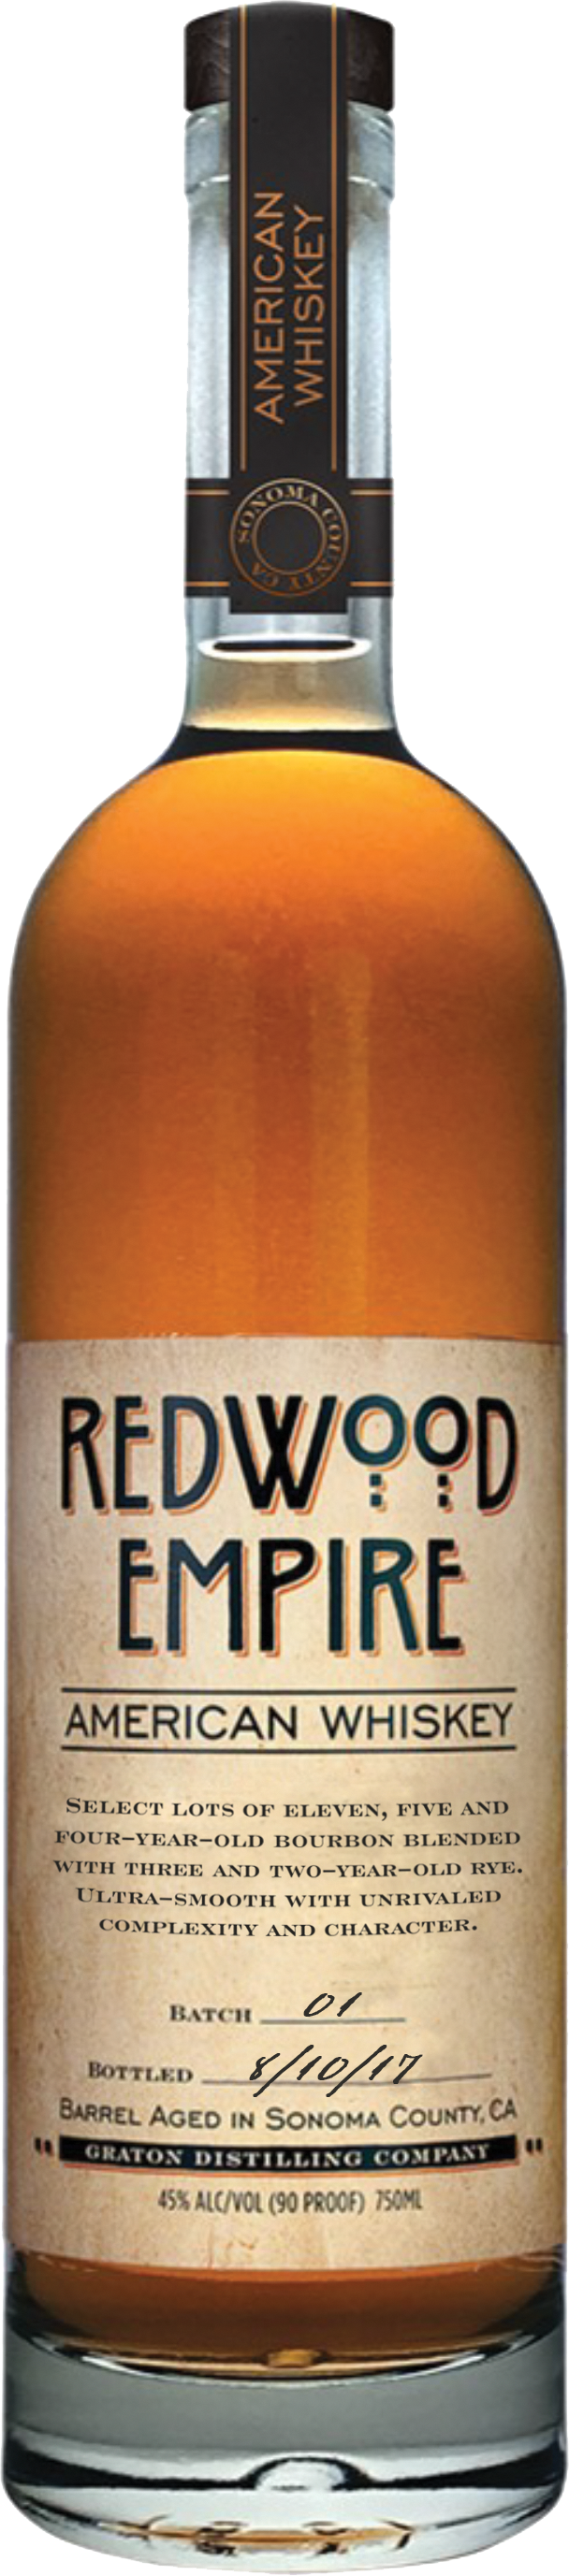 Redwood Empire American Whiskey Bottle PNG image